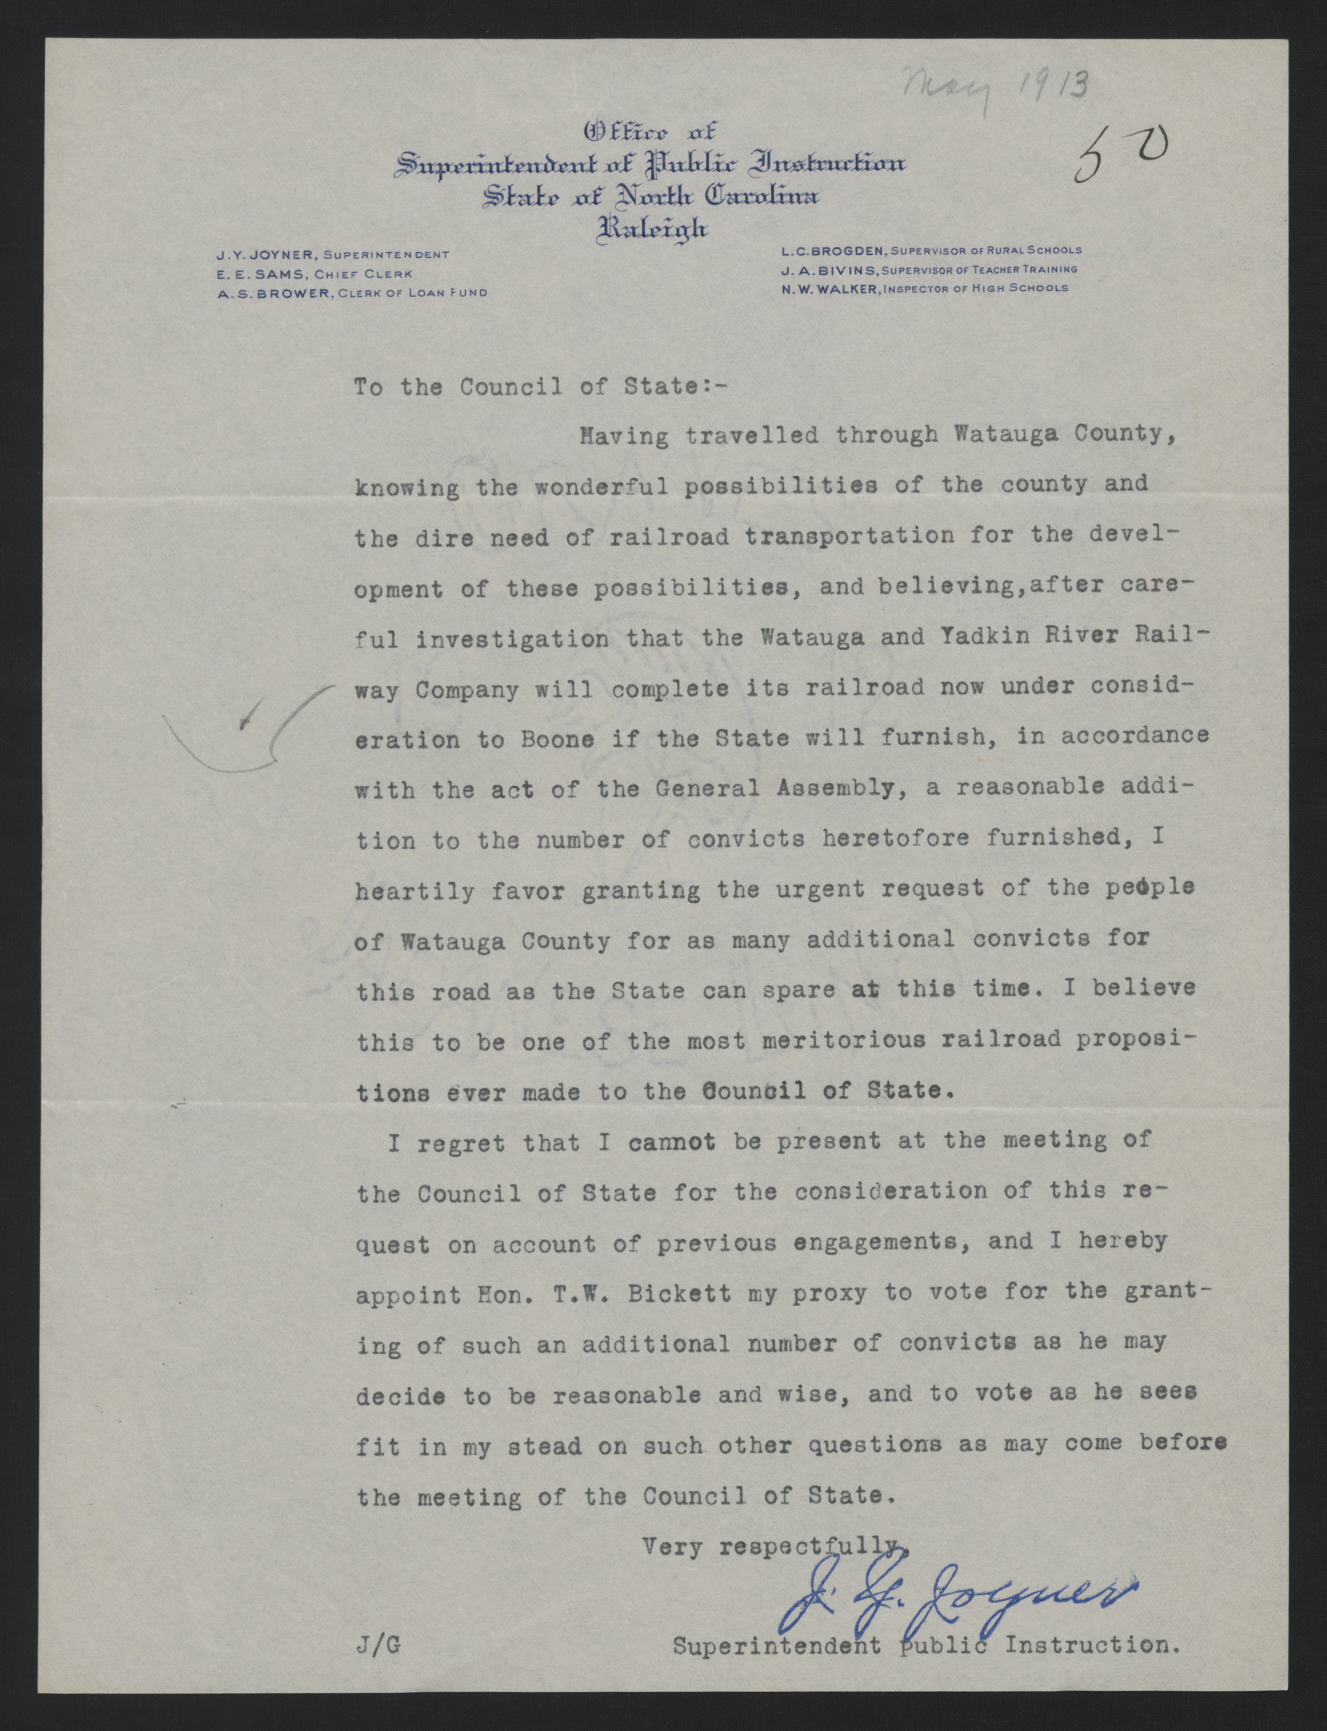 Letter from Joyner to the Council of State, May 1913